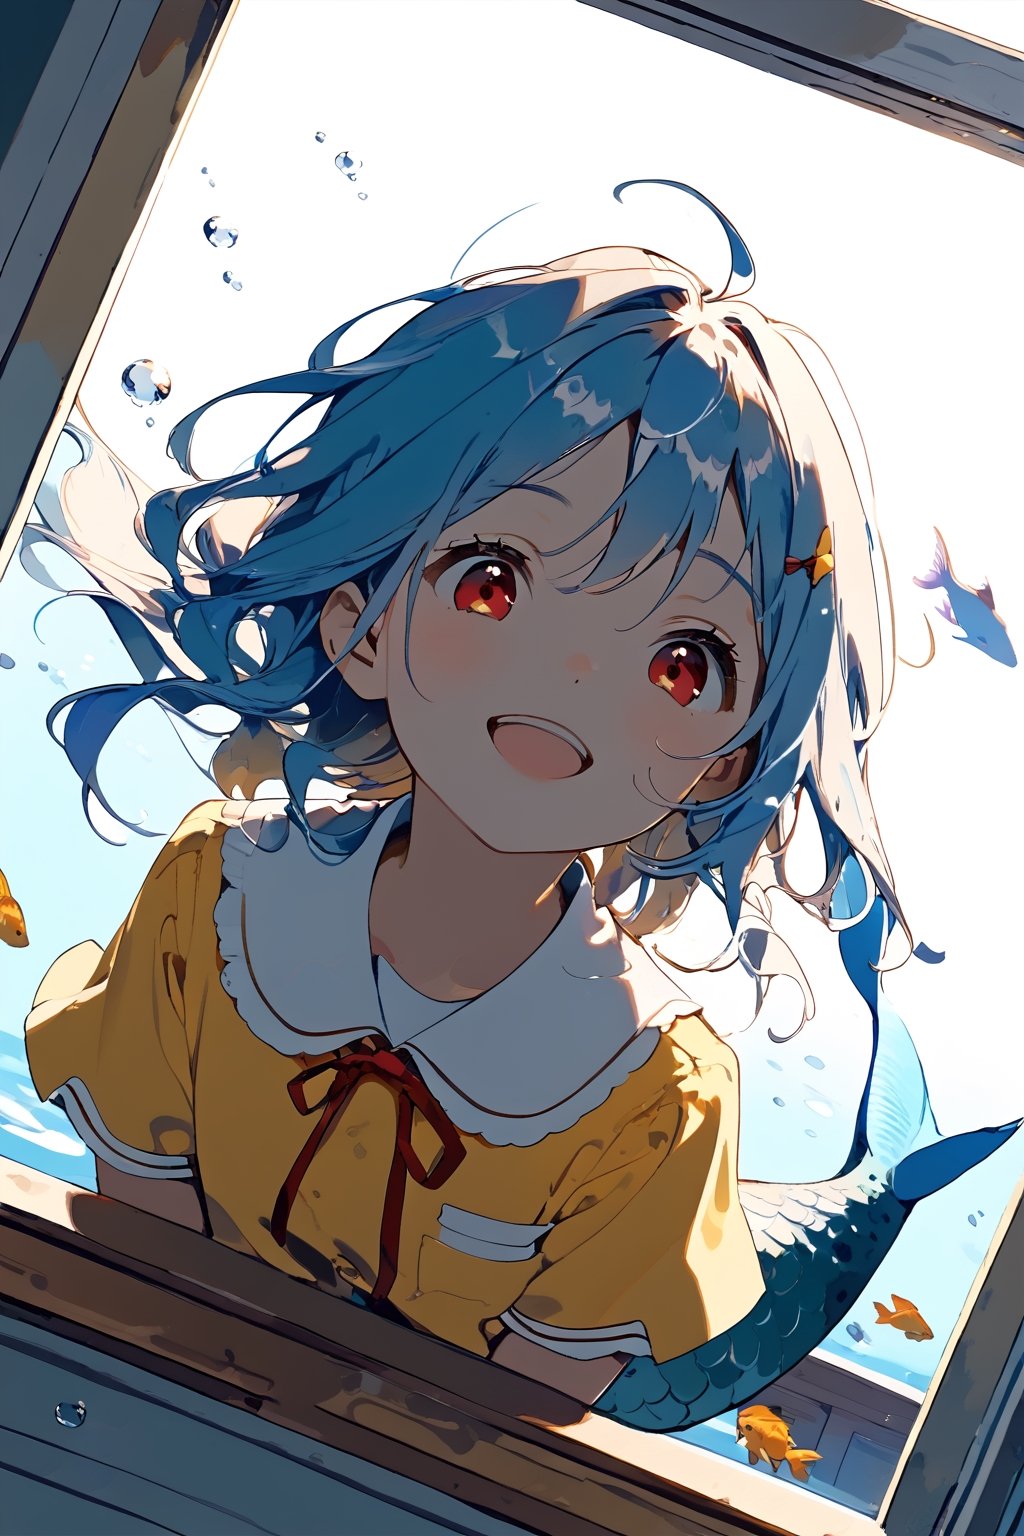 //quality, (masterpiece:1.4), (detailed), ((,best quality,)),//1girl,(mermaid:1.4),(loli:1.3), child,cute,//,(blue_hair:1.3),ahoge,floating_hair, detailed_eyes,(red eyes:1.2),//,bows,frilled,(yellow kindergarten uniform:1.3), yellow dress,//,(happy:1.2),smile,teeth,mouth_open,looking_up,//,(arm support on window),(facing_viewer, straight-on:1.4),//,(classroom:1.4), window, underwater,(fish:1.2), bubbles,close_up,from outside window